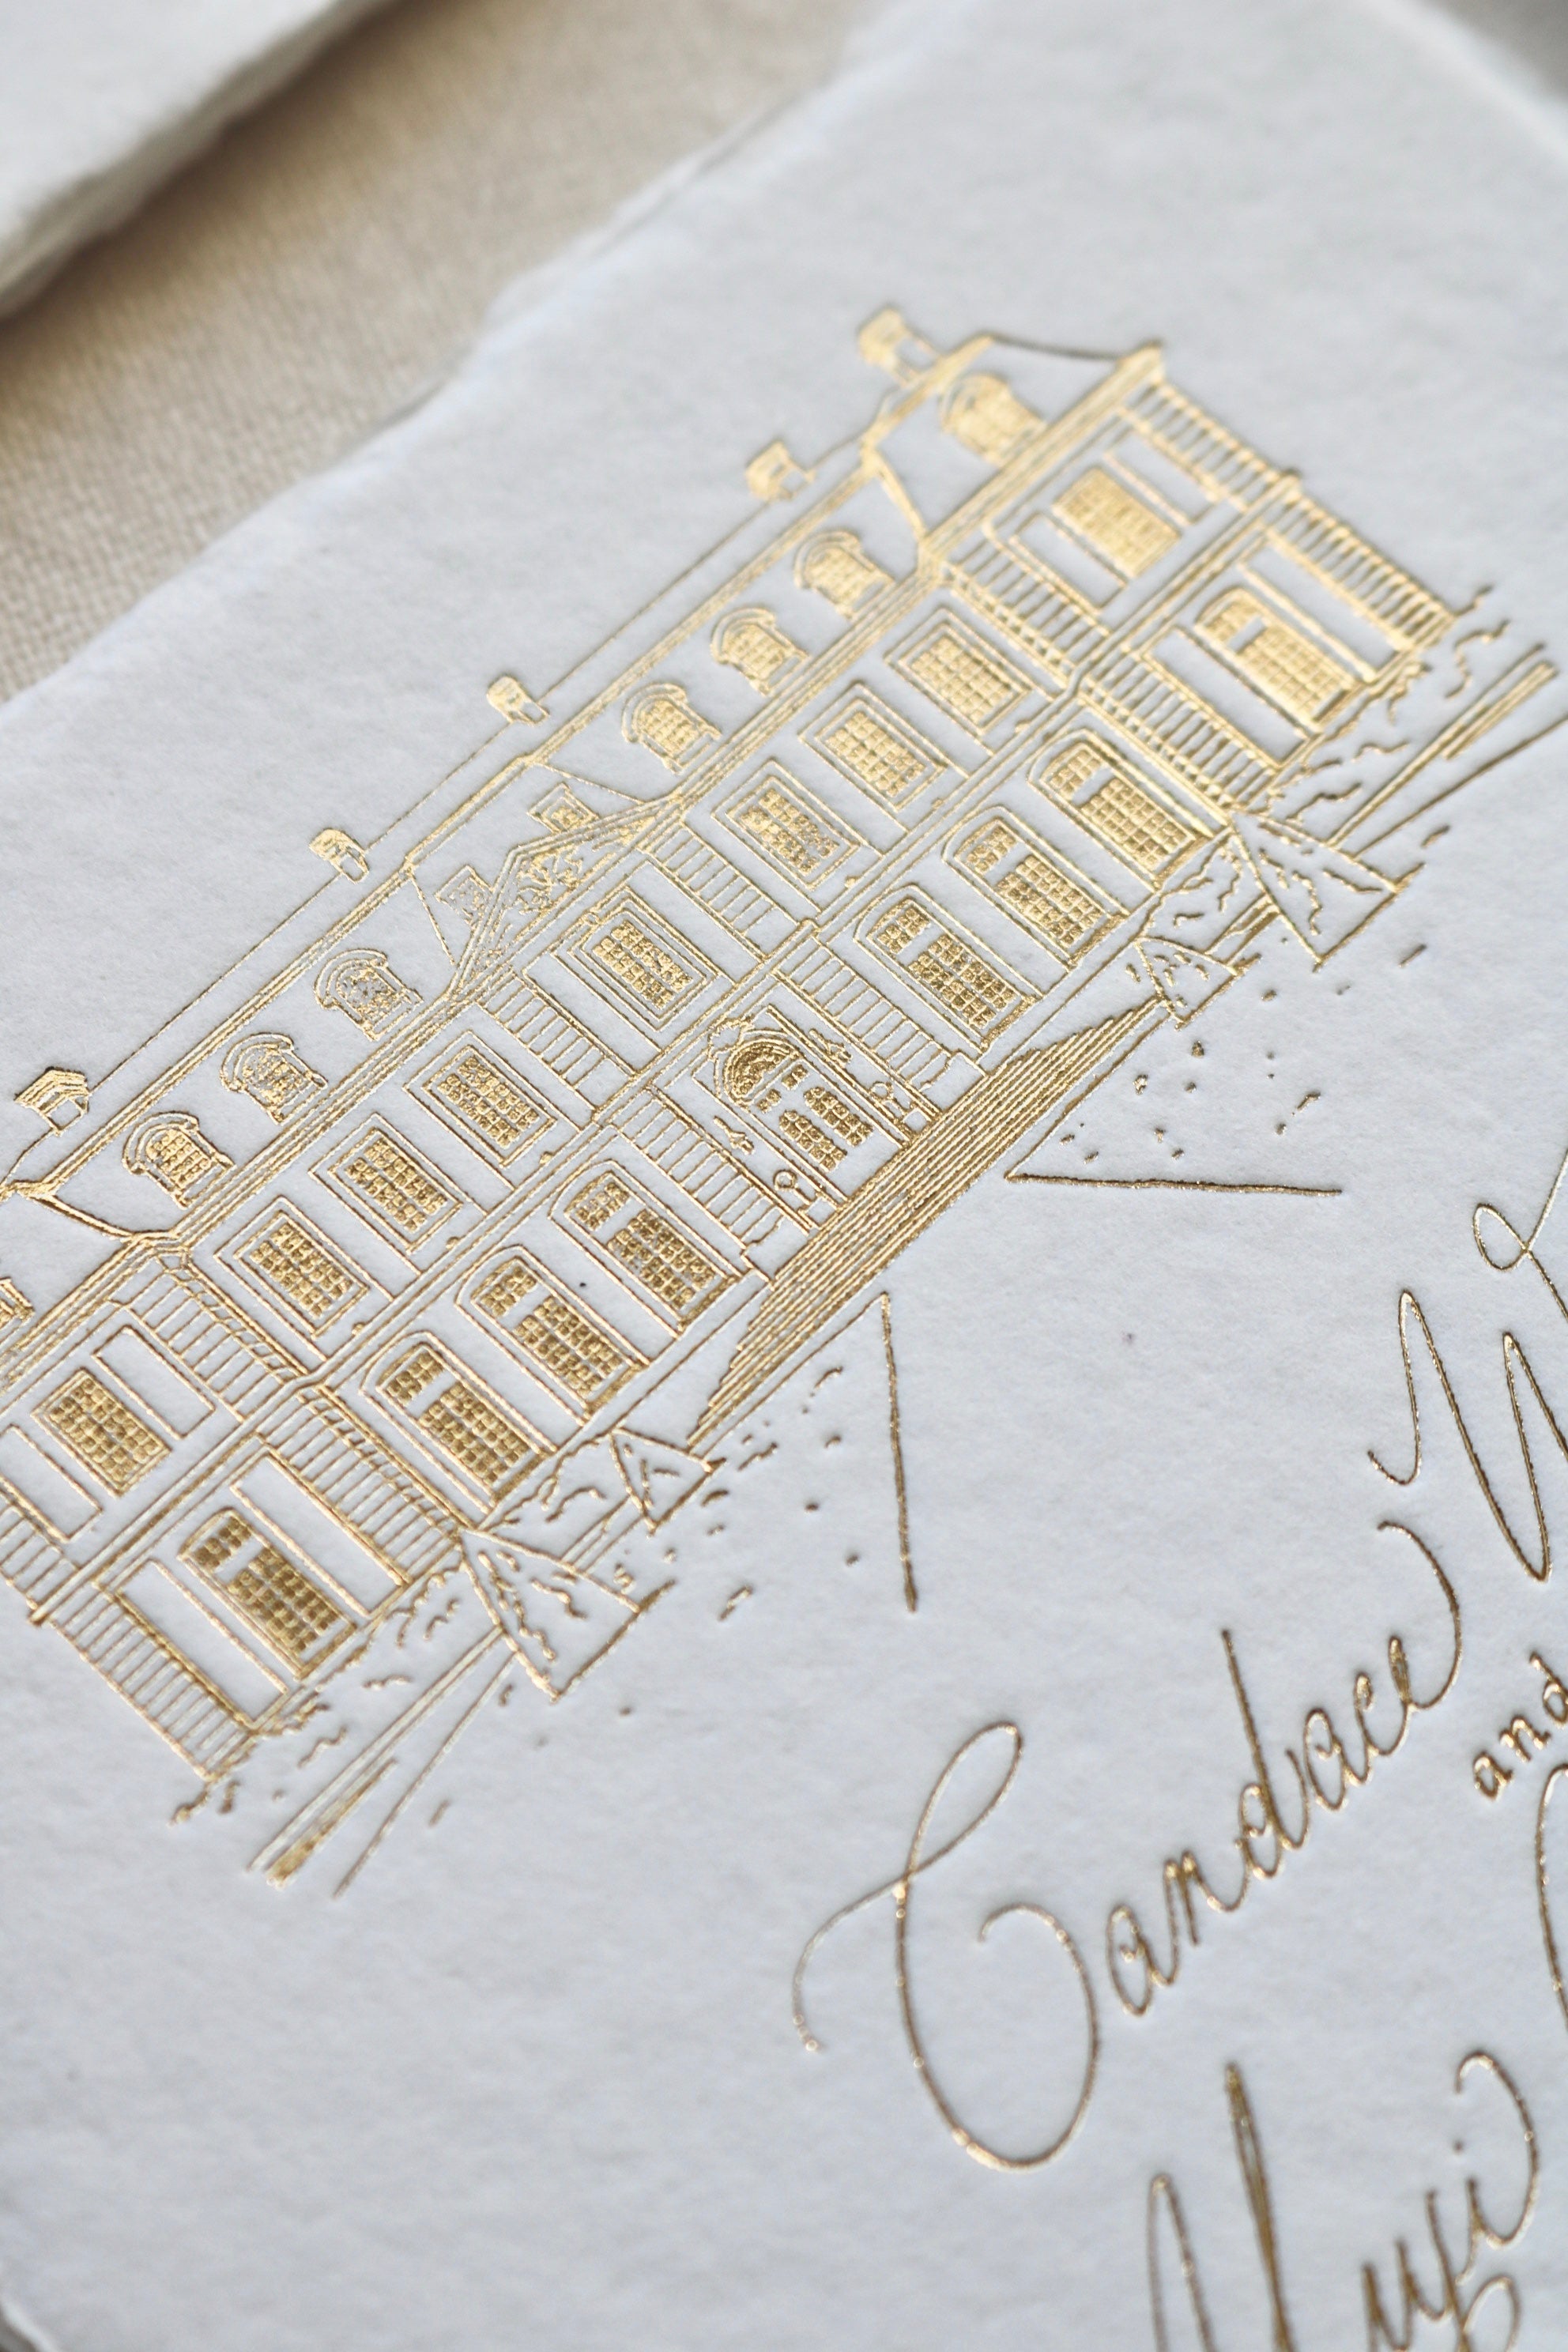 Discover the magic of hot foil printing on handmade paper for your wedding stationery. Expert tips and inspiring designs await!